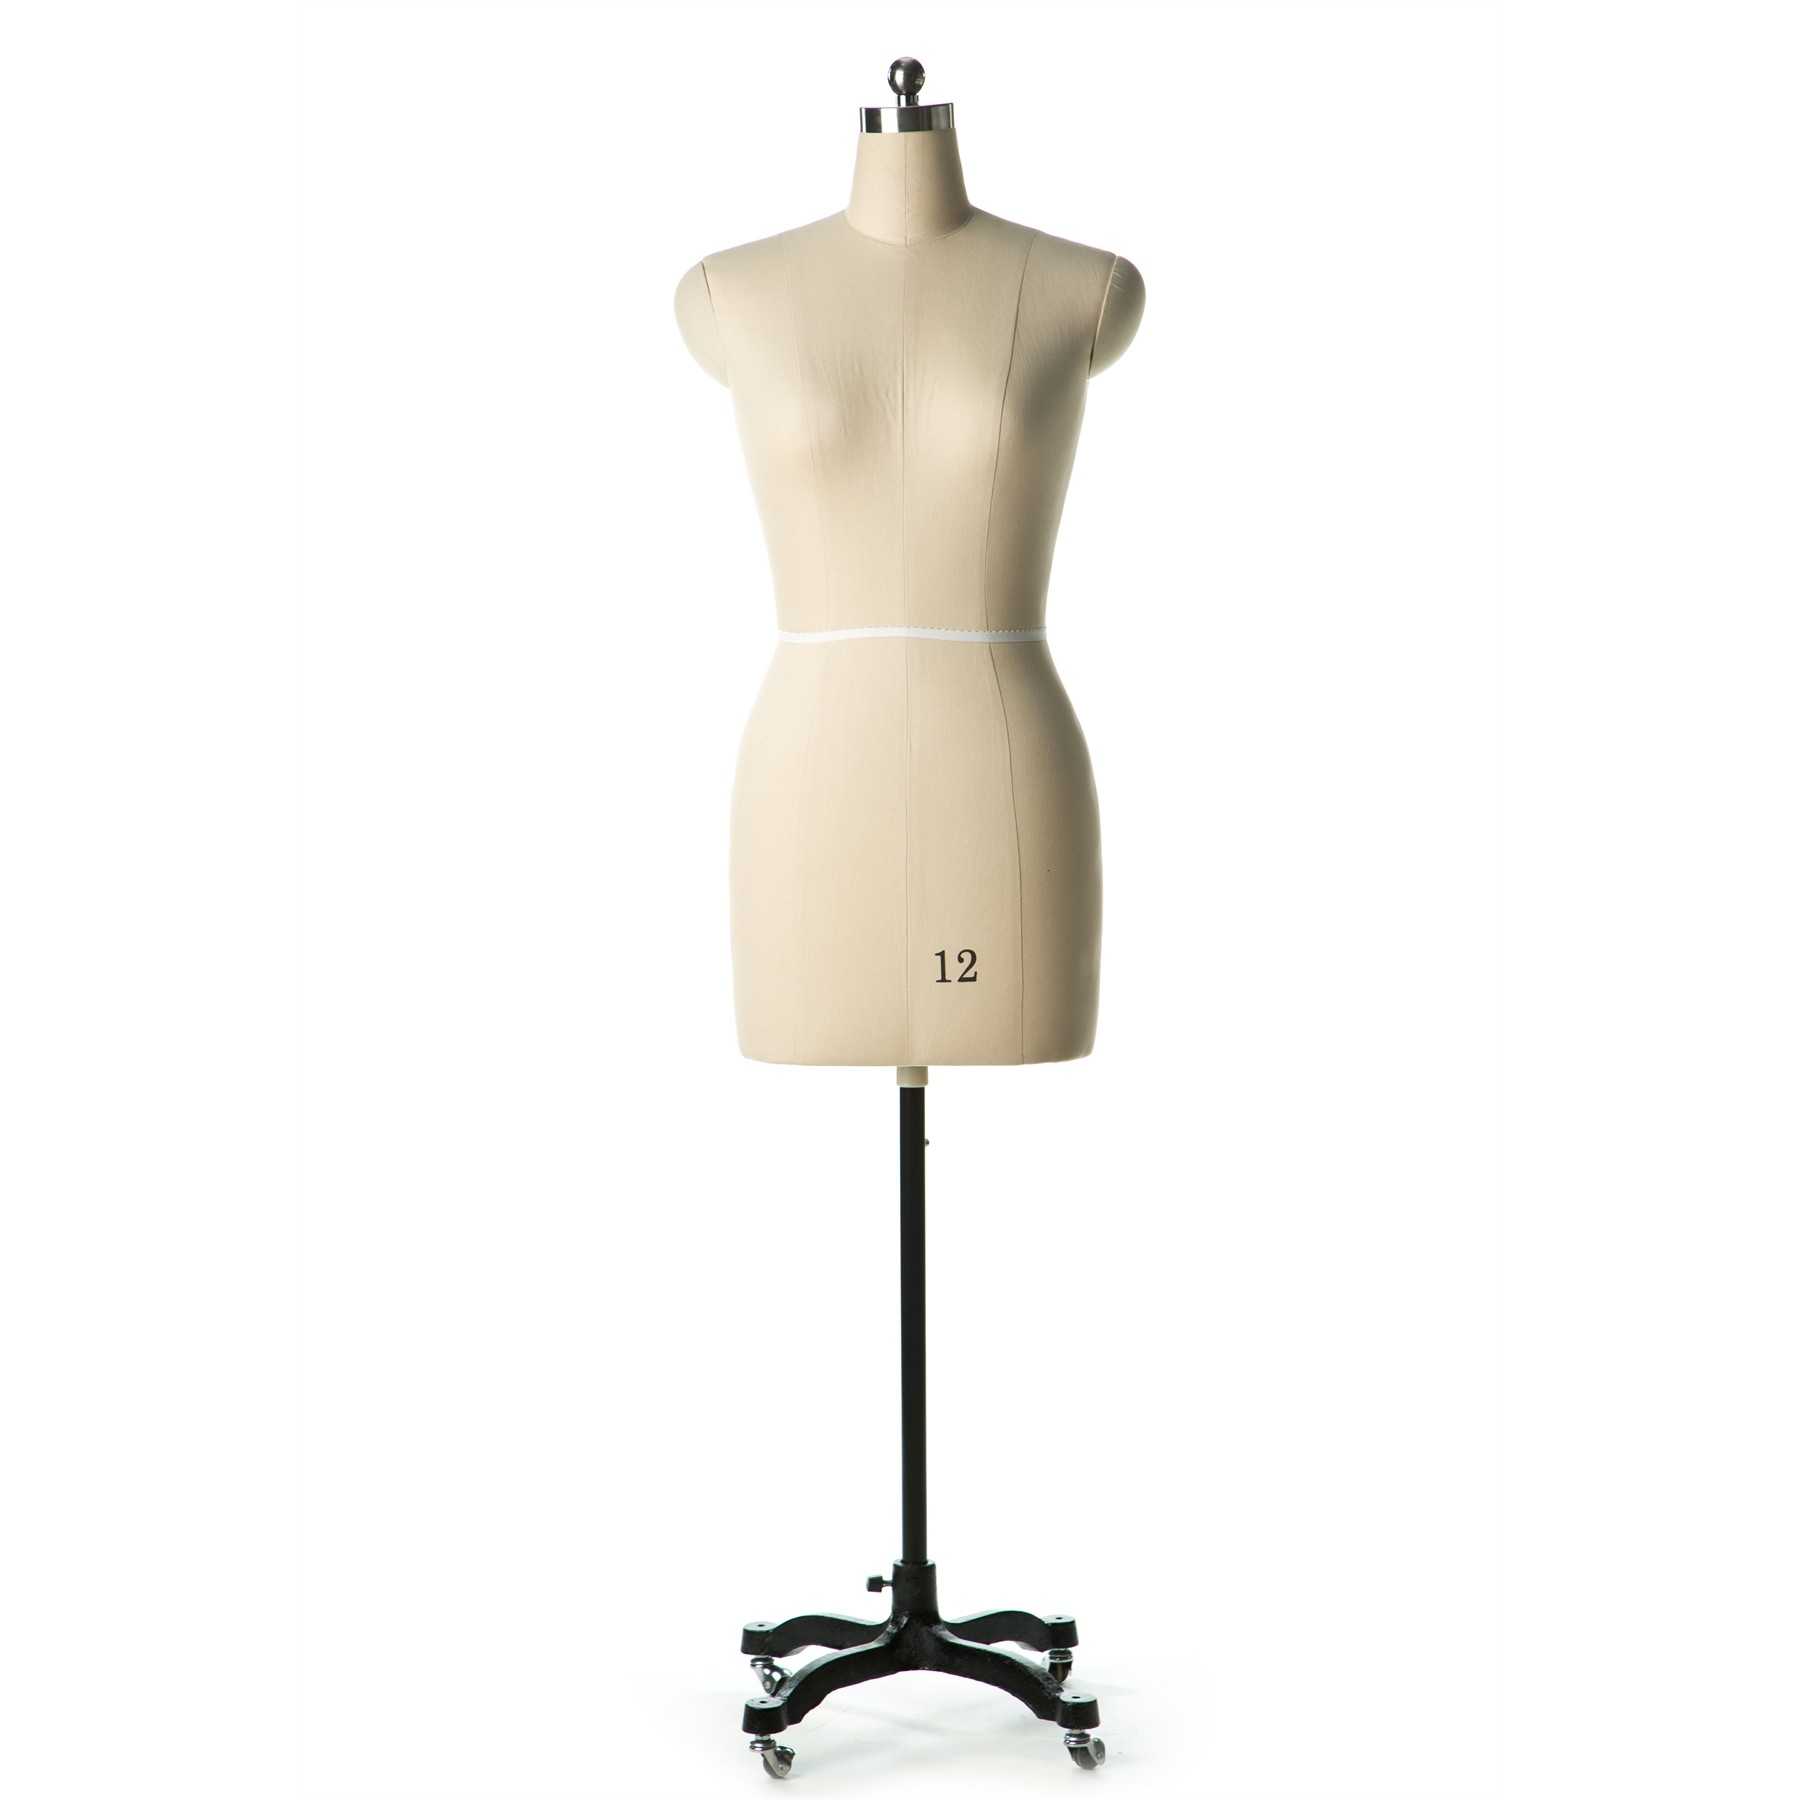 Professional Female Dress Form w/ Removable Magnetic Shoulders | The ...